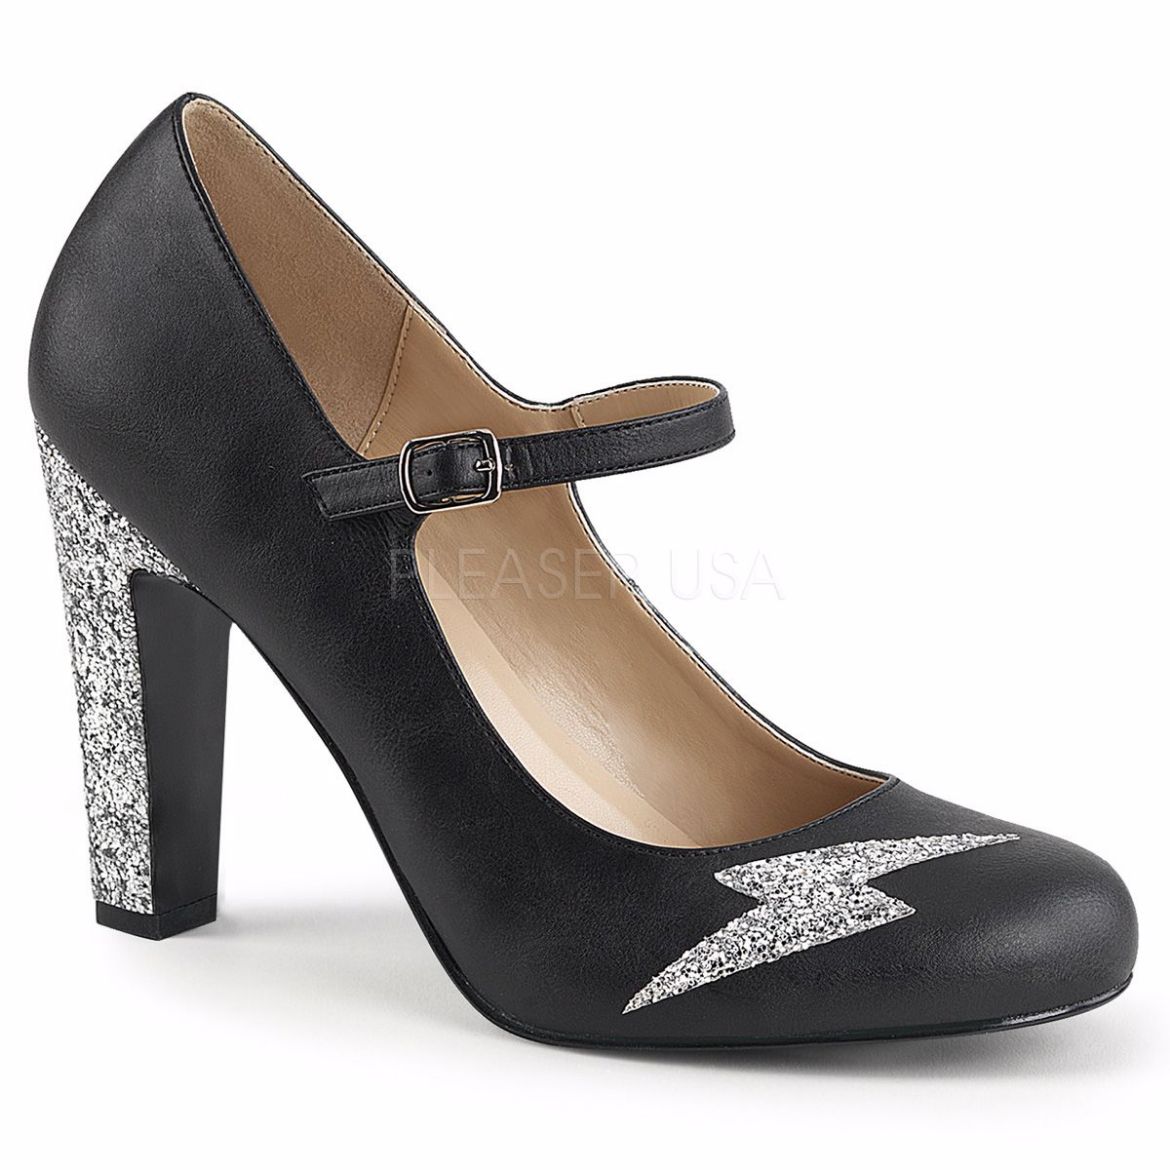 Product image of Pleaser Pink Label Queen-02 Black Faux Leather-Silver Glitter, 4 inch (10.2 cm) Heel Court Pump Shoes